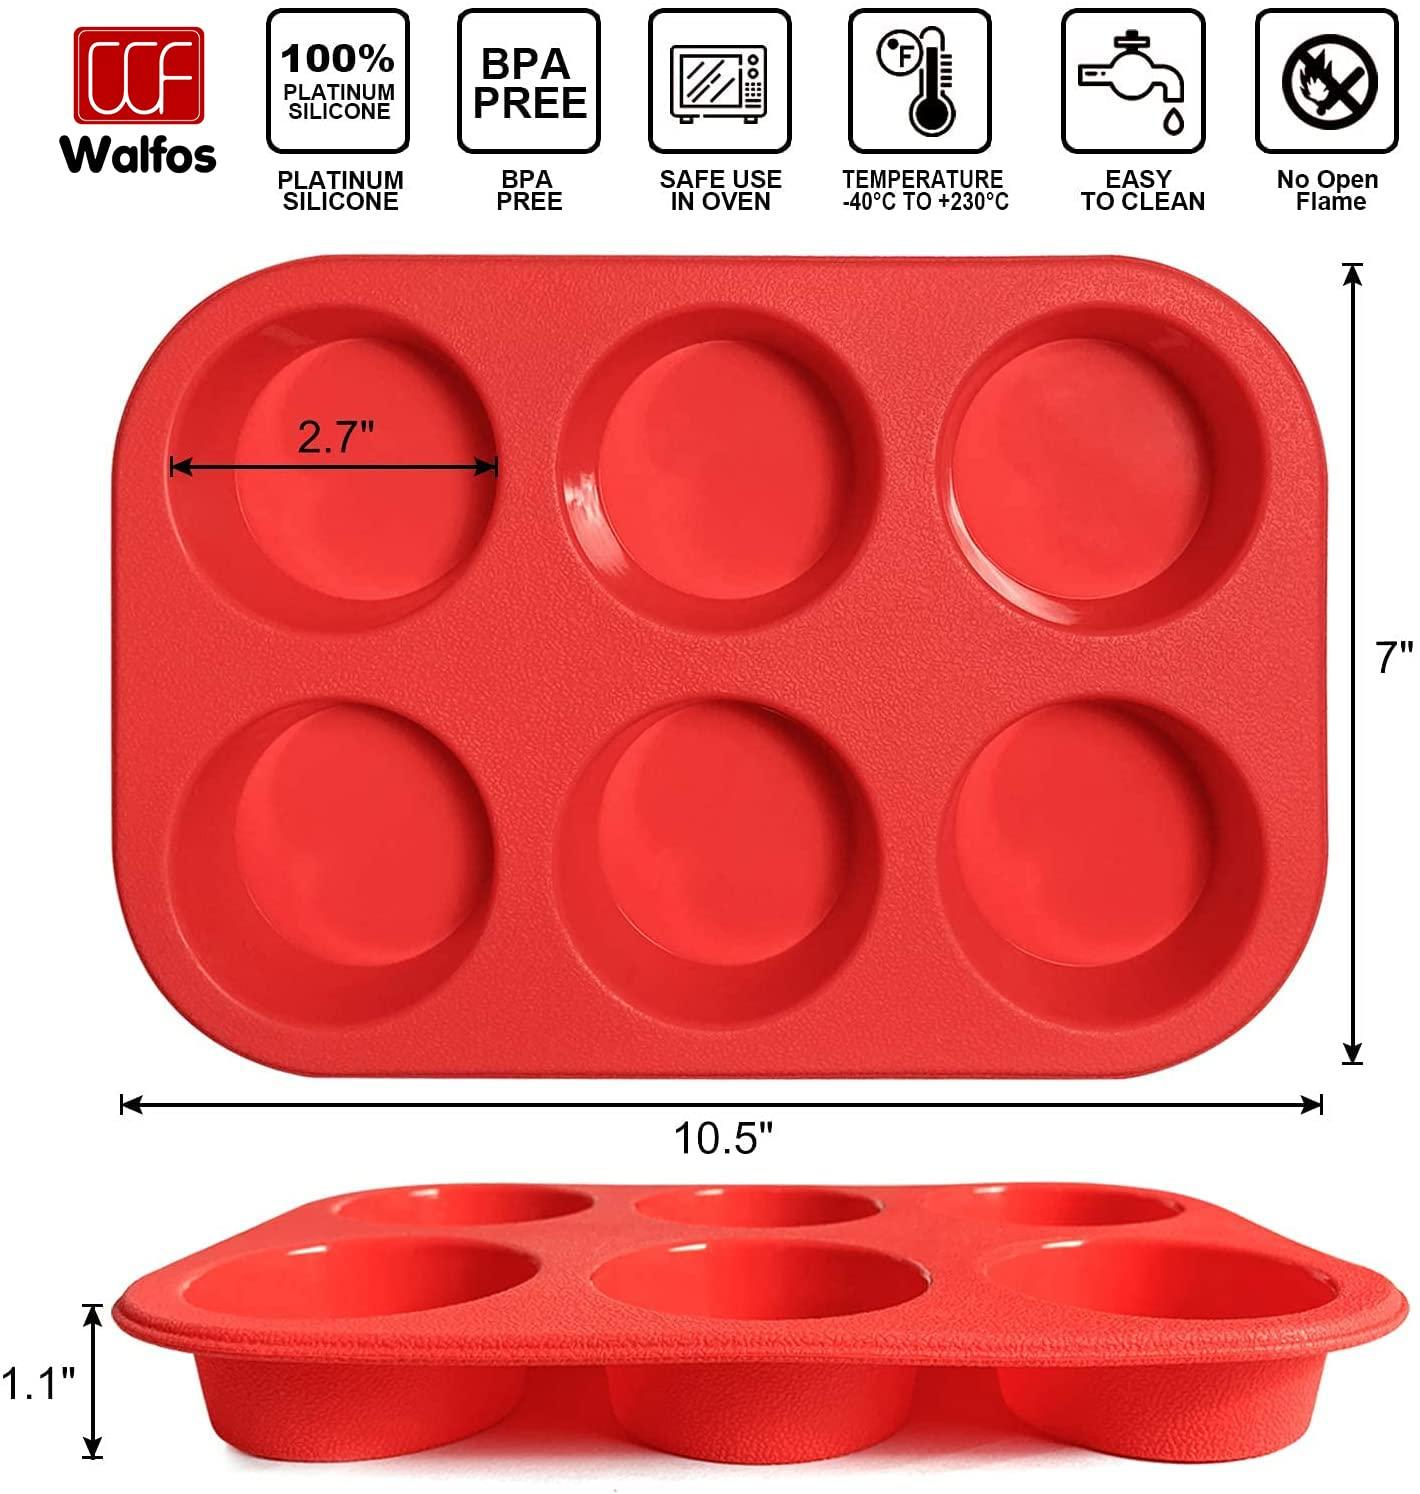 walfos Silicone Muffin Pan - 6 Cup Non-Stick Silicone Cupcake Pan, Just PoP Out! Food Grade and BPA Free Baking Cups, Perfect for Egg Muffin, Cupcake, Dishwasher Safe (2 Pack Muffin Pan) - CookCave